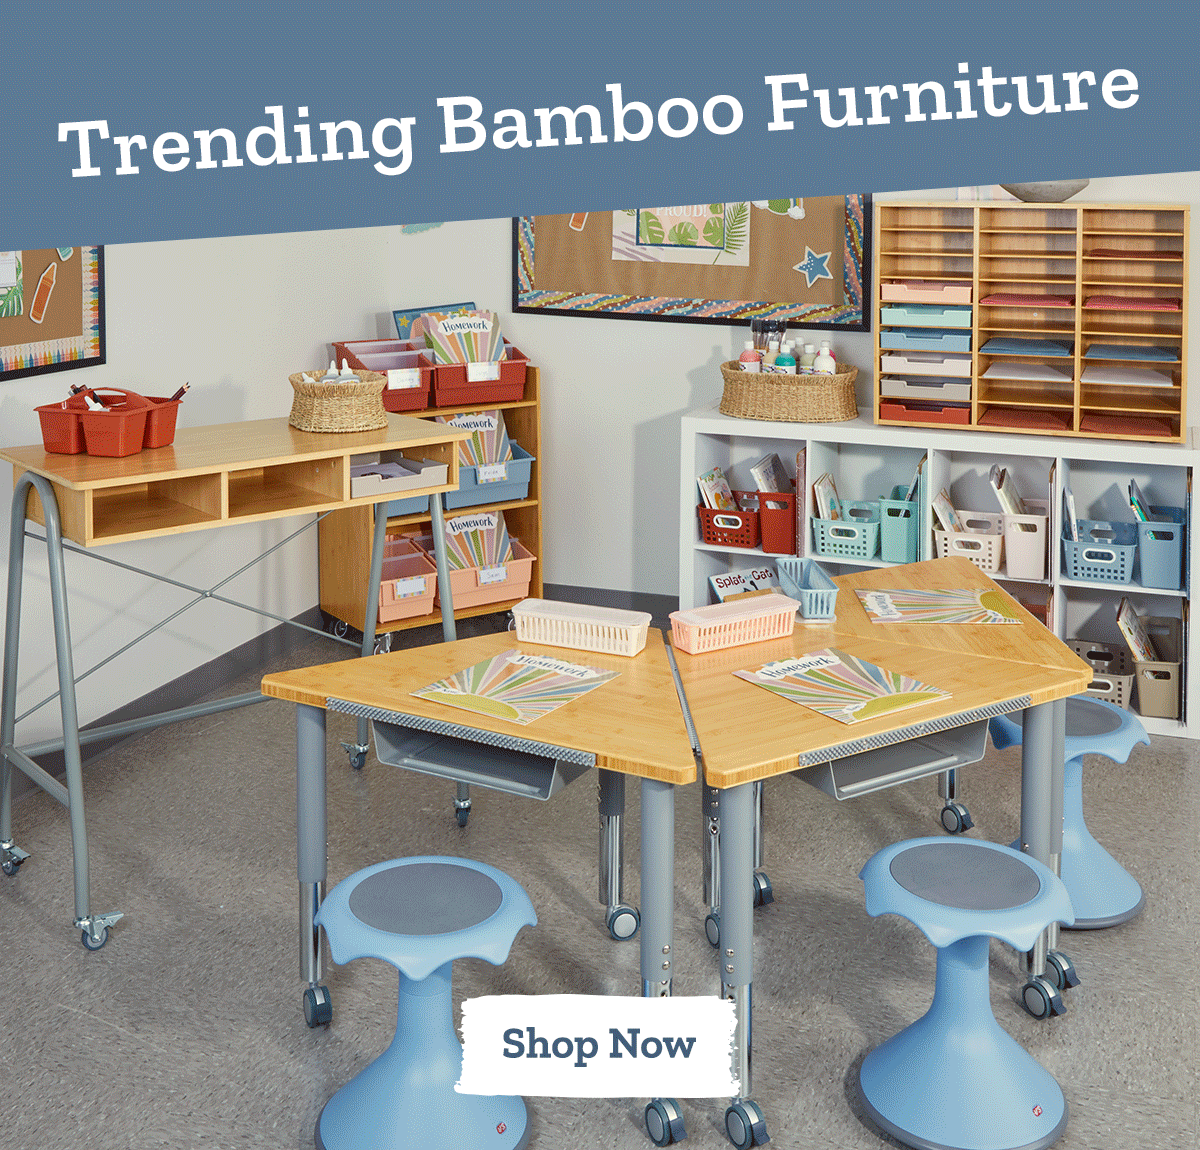 Trending Bamboo Furniture That Adapts to Classroom Needs